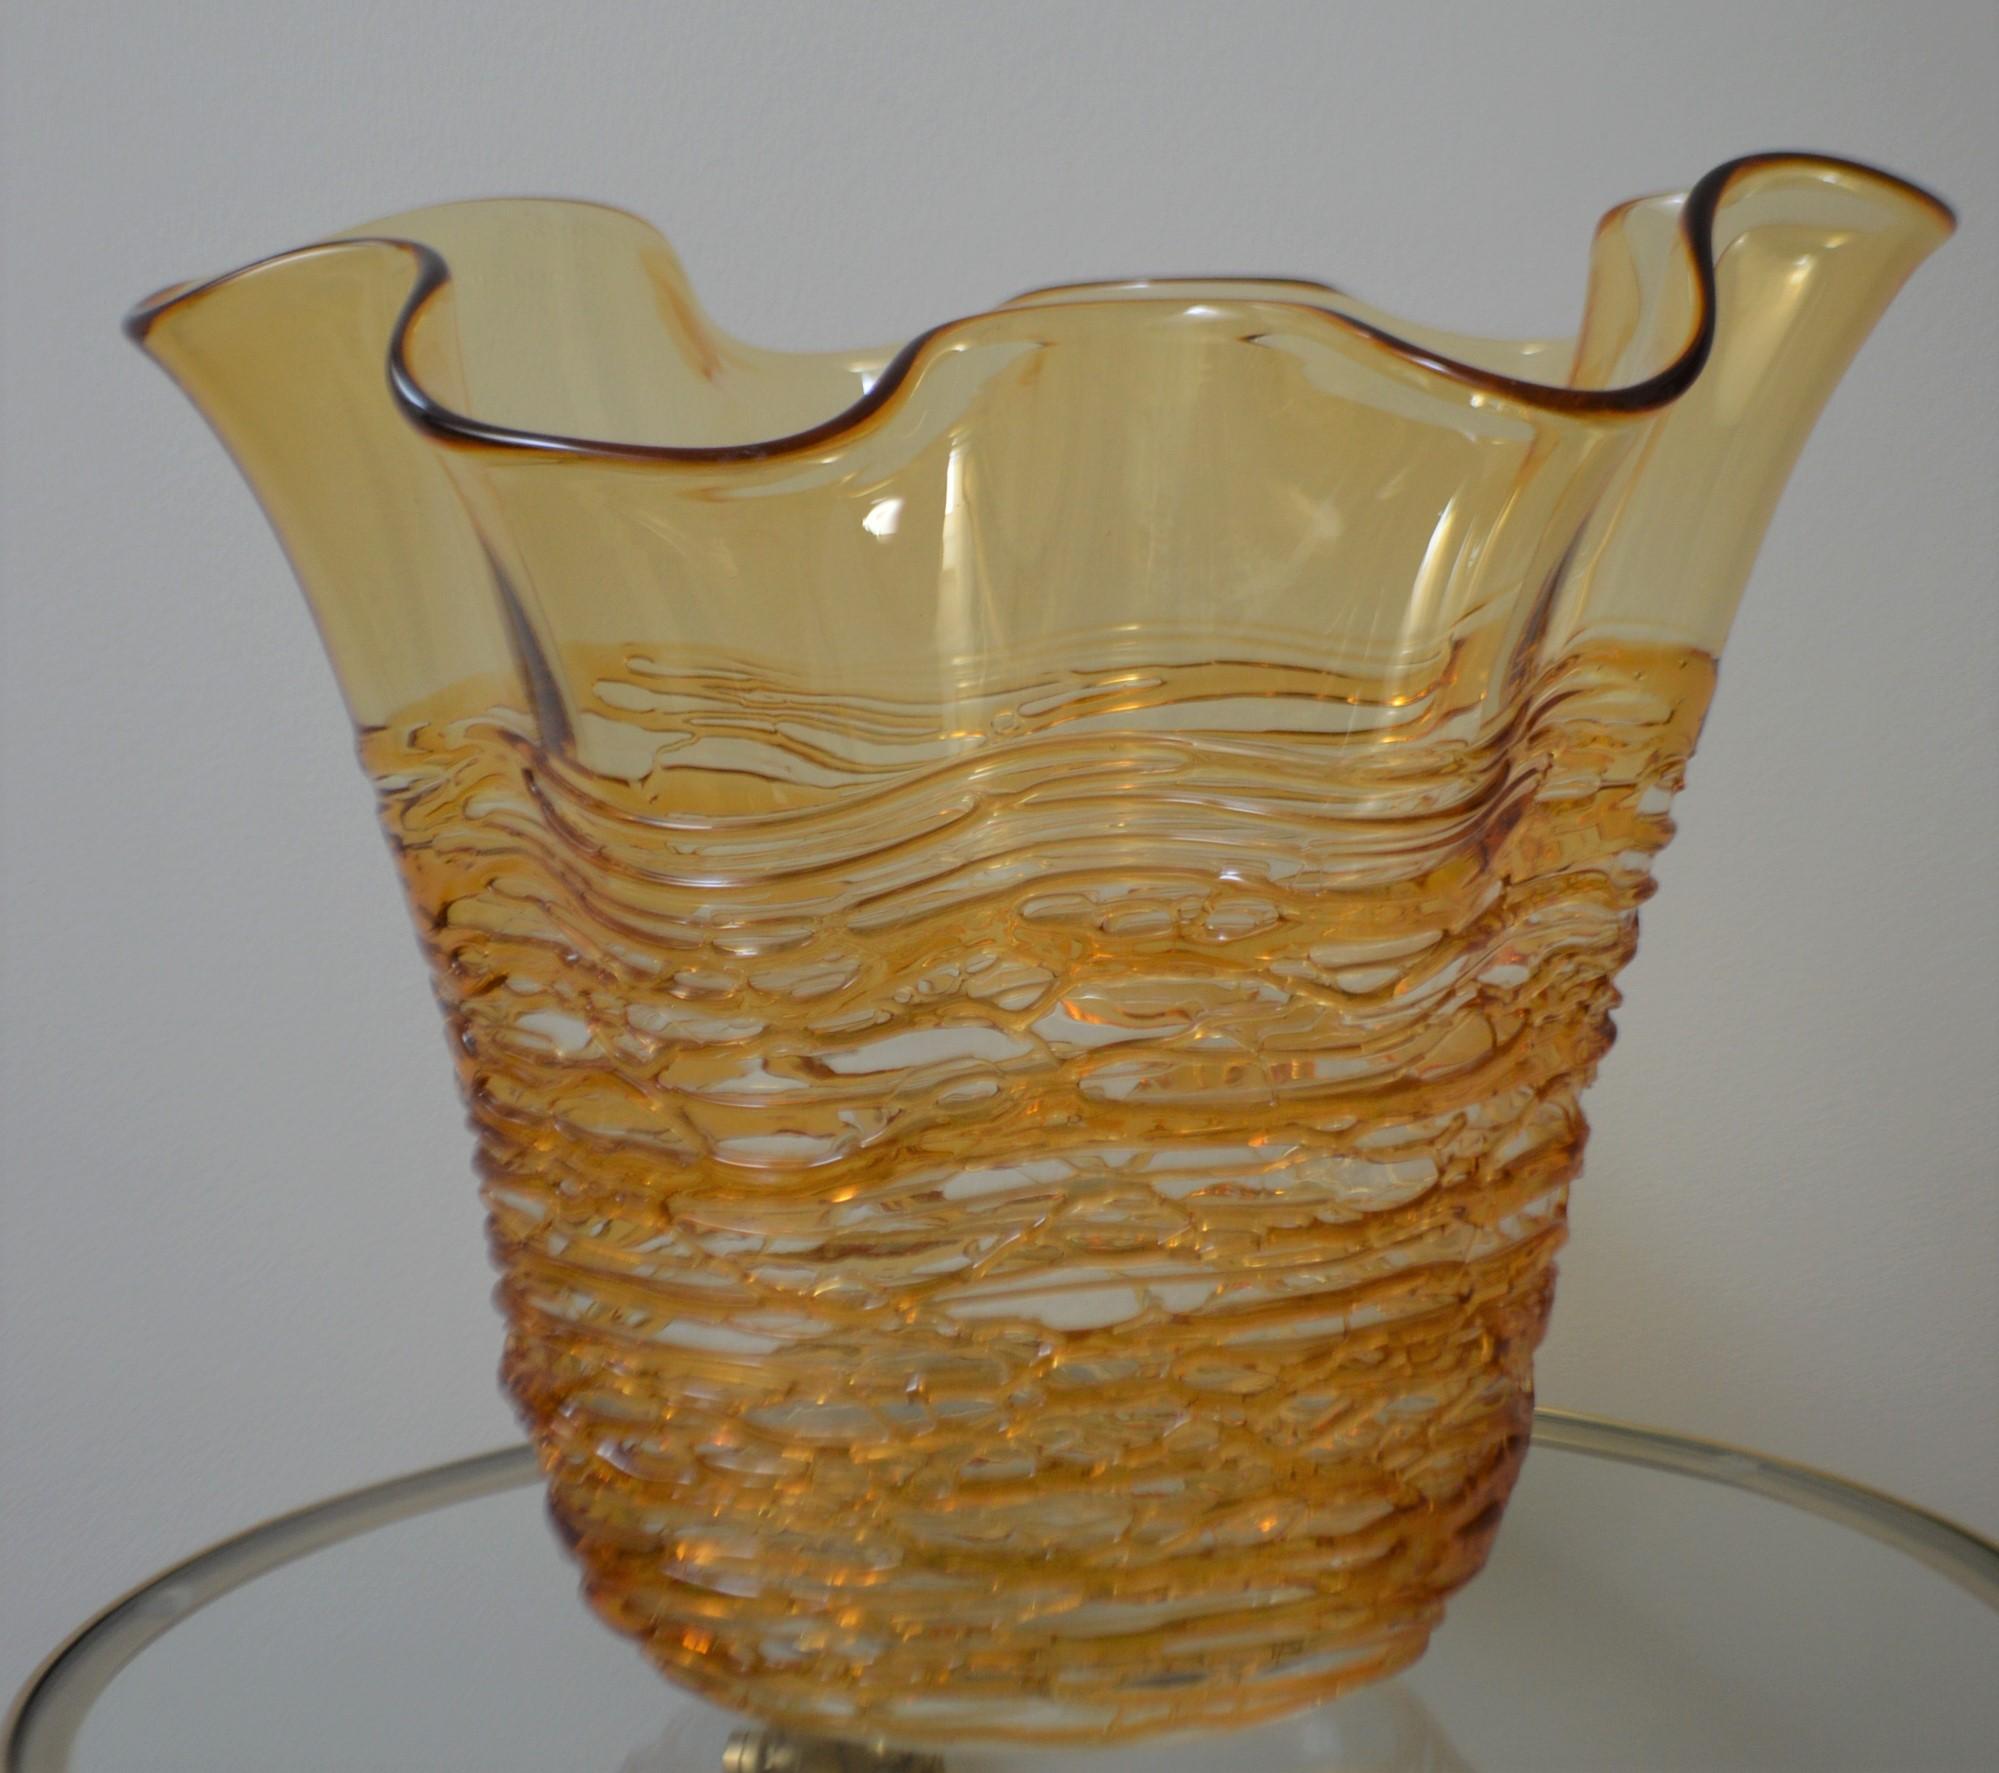 One of a kind hand blown decorative Murano glass vase with intricate glass work forming a lace effect. 
The color of the glass is gold and changing in intensity according to the light. Measures: Height 12 1/2